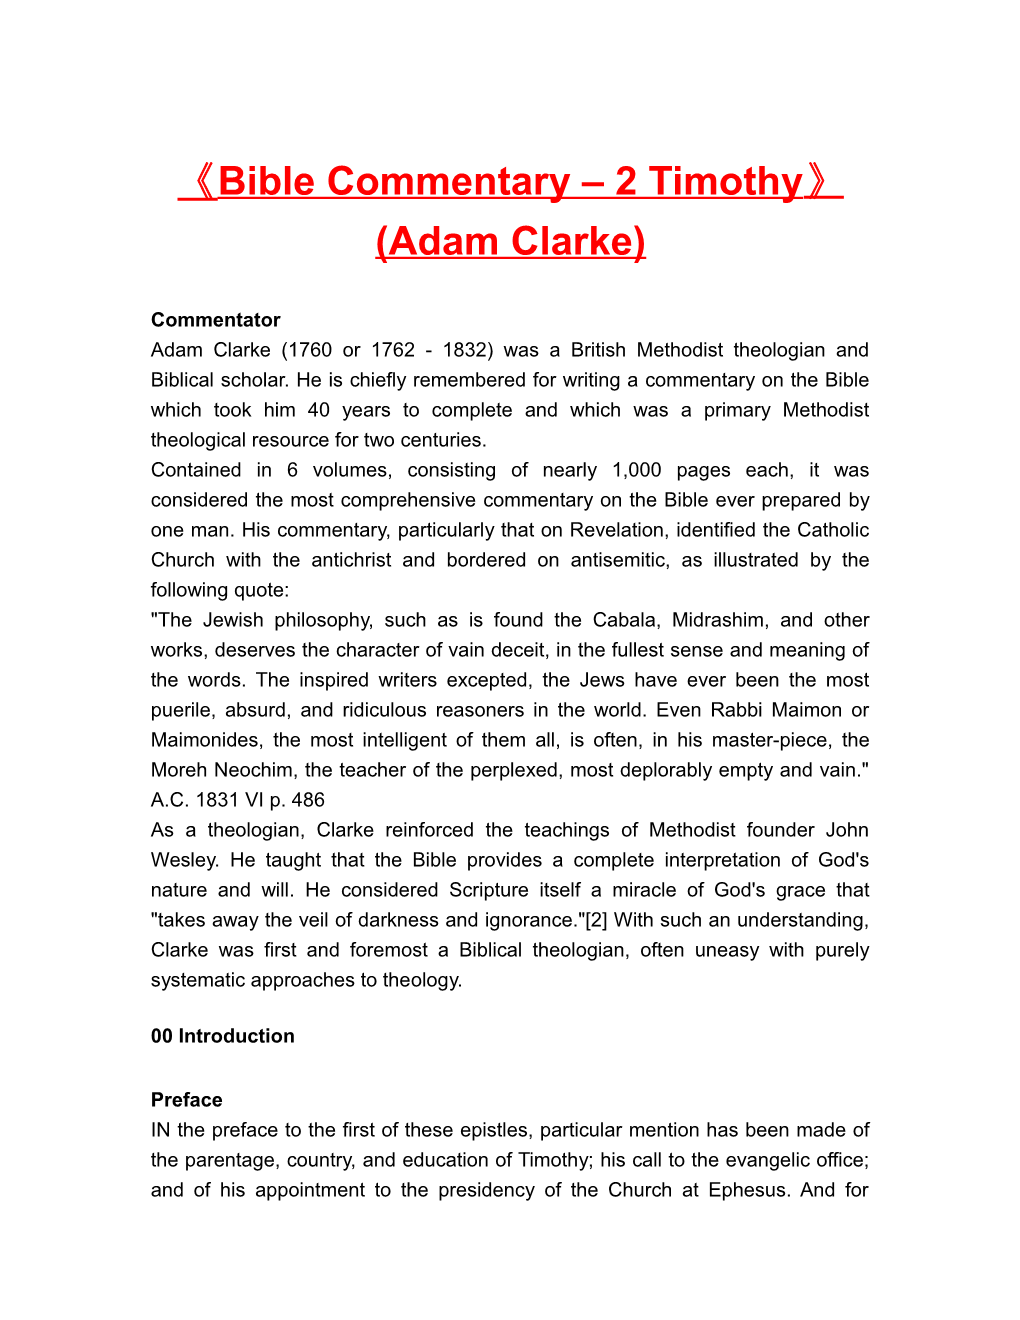 Bible Commentary 2 Timothy (Adam Clarke)